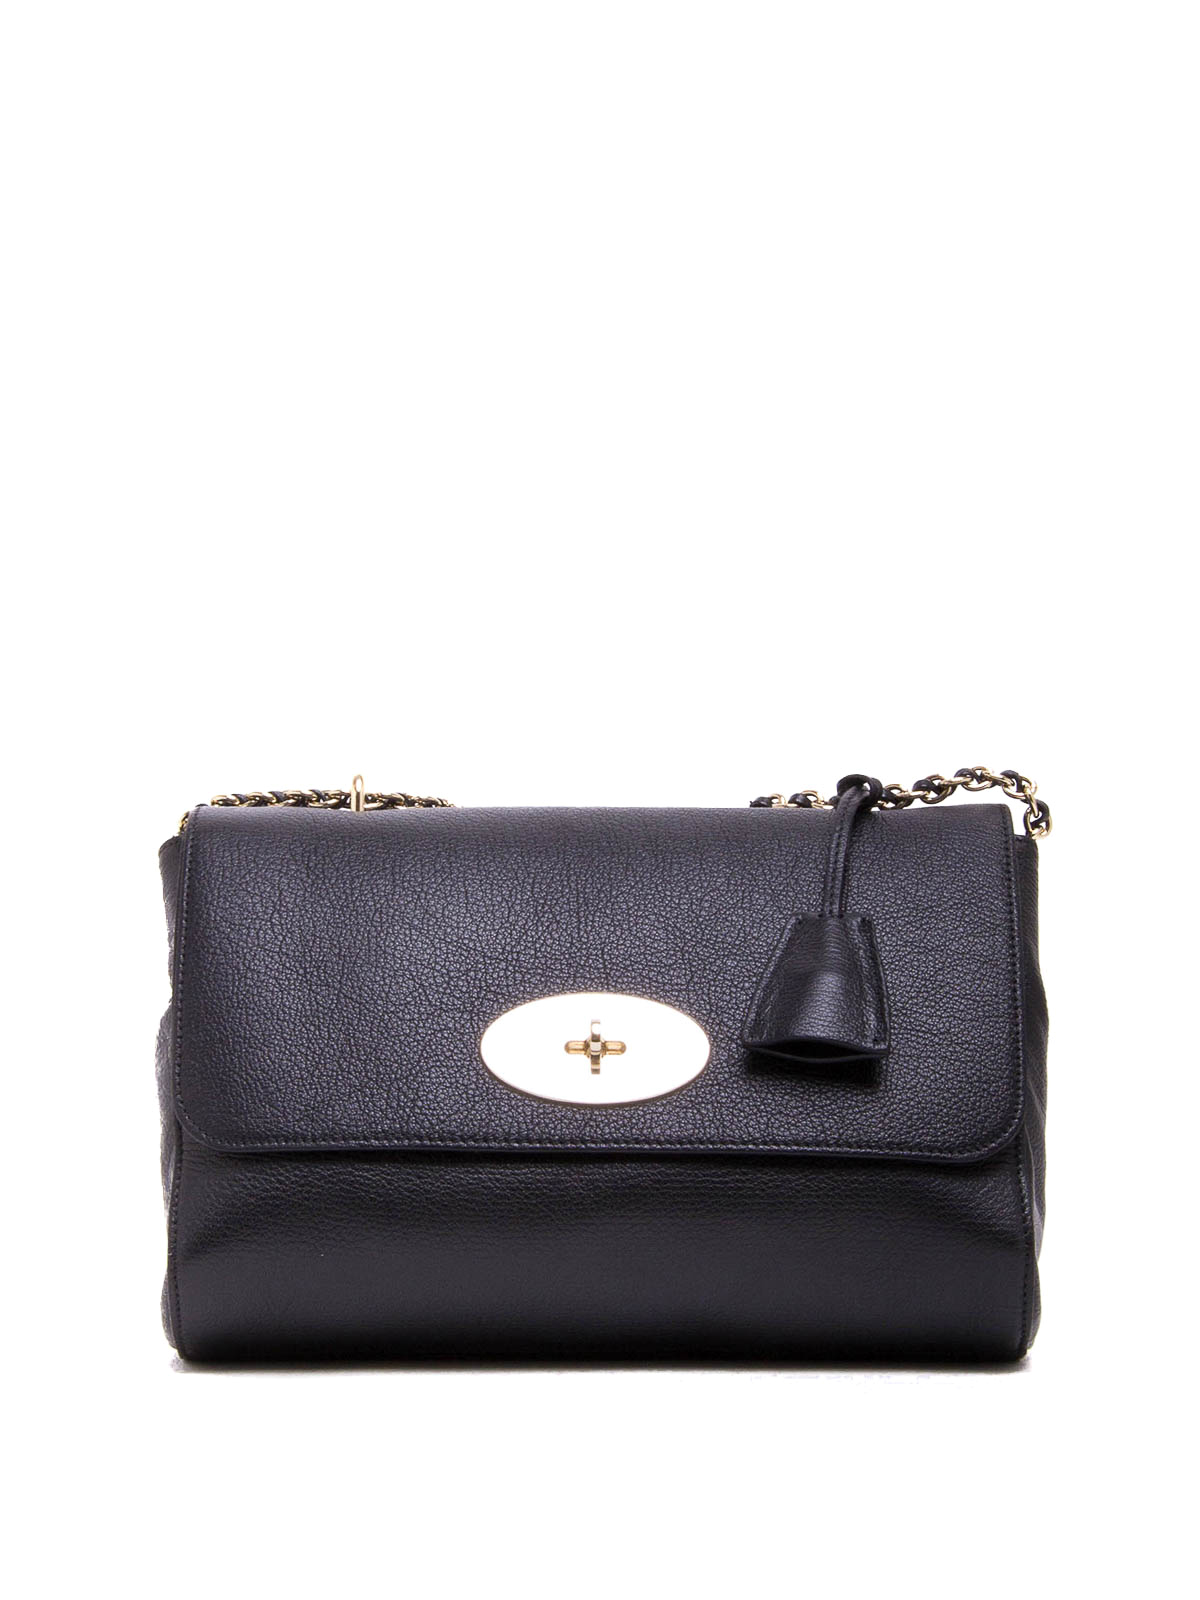 Mulberry Medium Lily Goat Leather Bag In Black